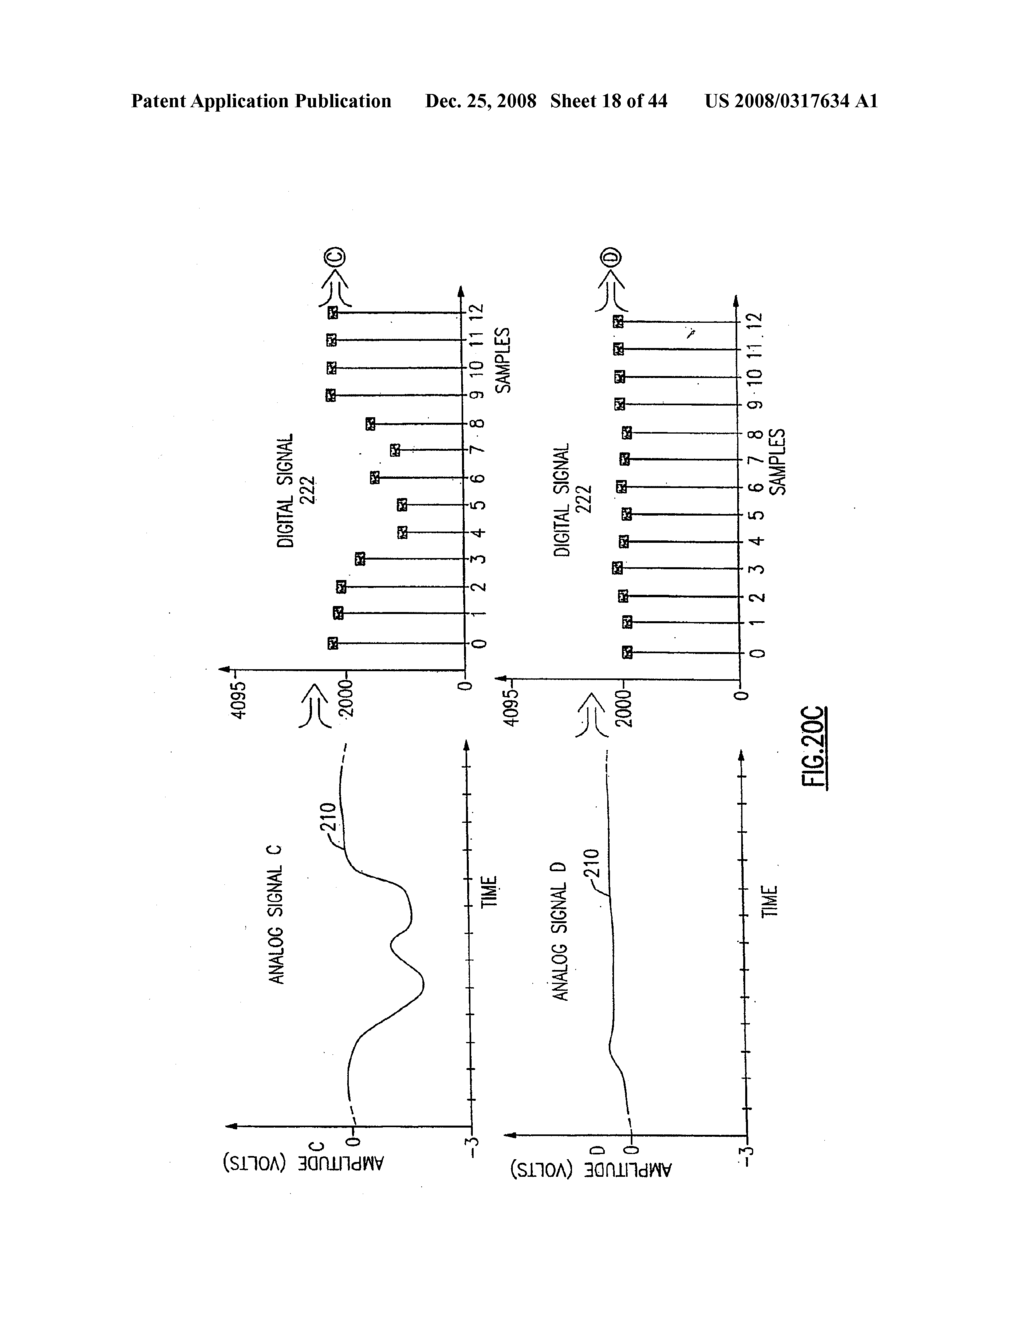 FLUIDIC CIRCUITS FOR SAMPLE PREPARATION INCLUDING BIO-DISCS AND METHODS RELATING THERETO - diagram, schematic, and image 19